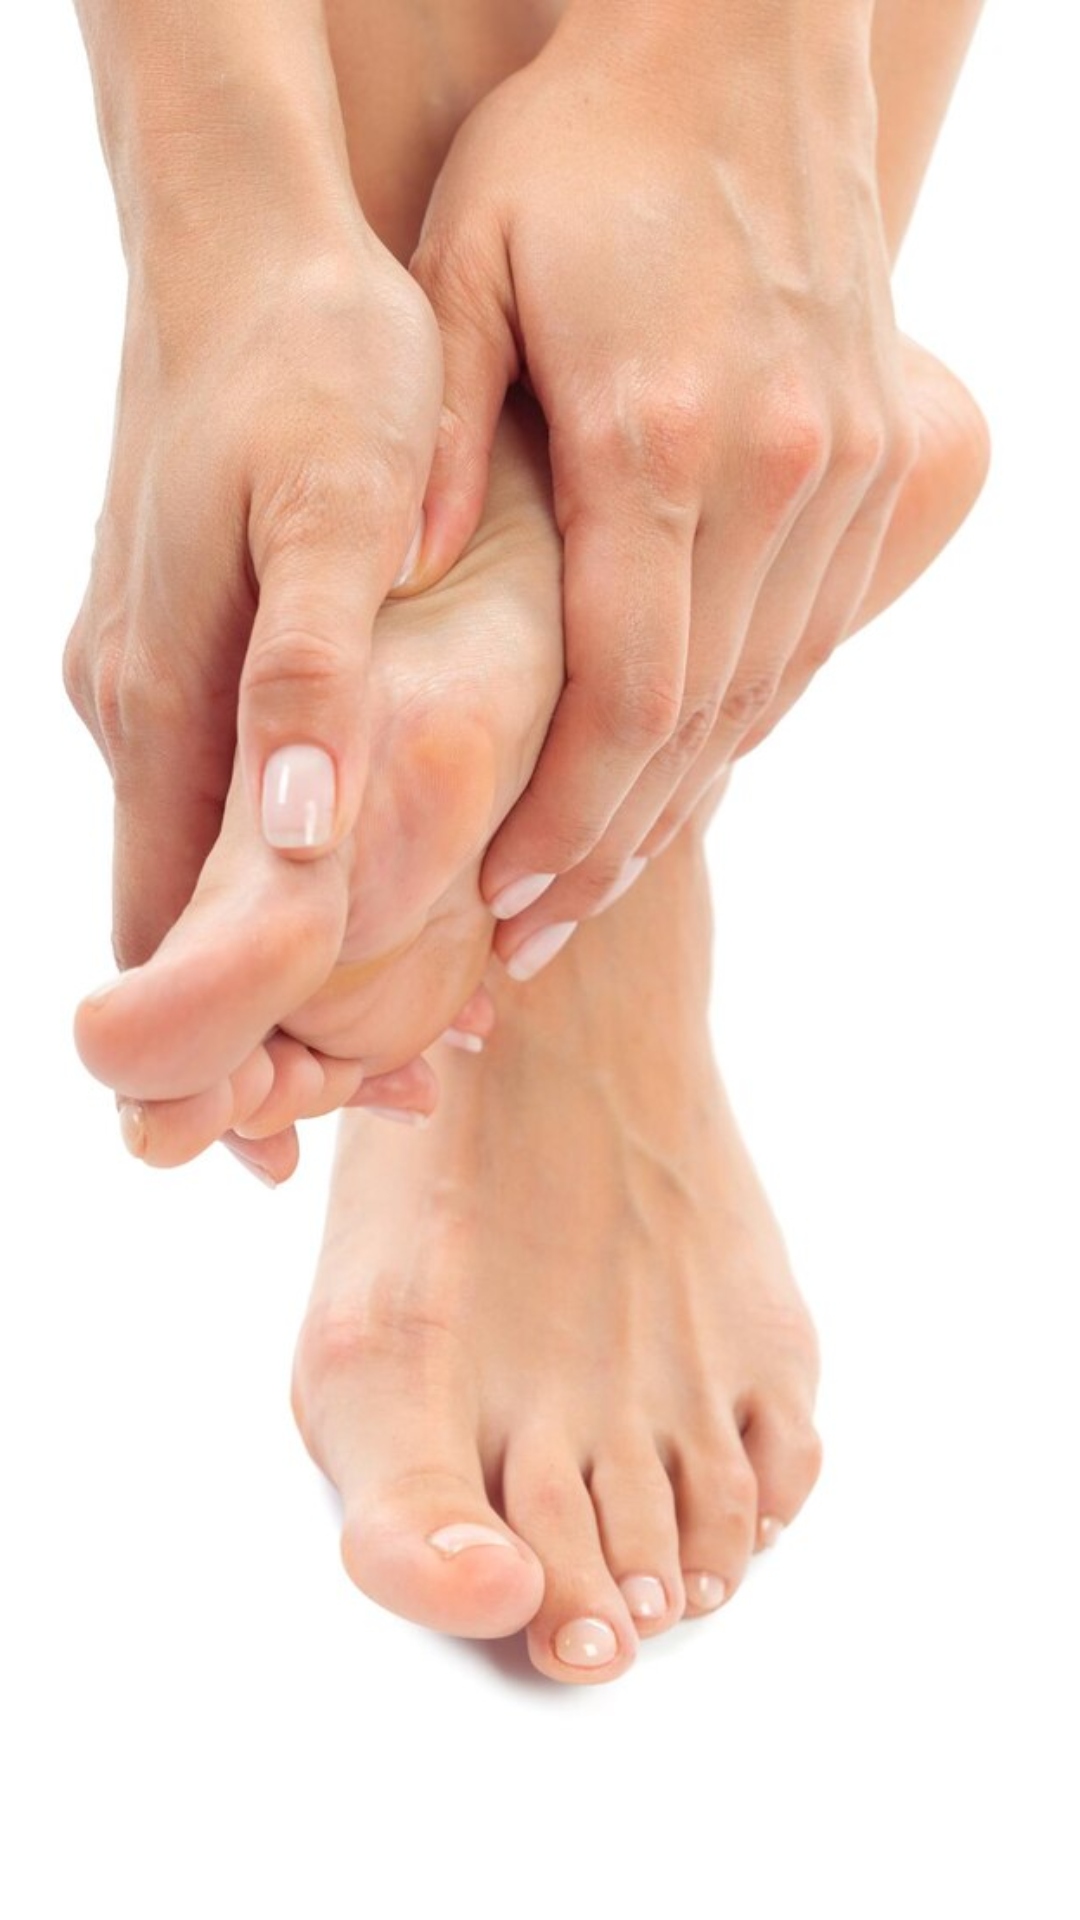 5 visible indications of high blood sugar in your feet